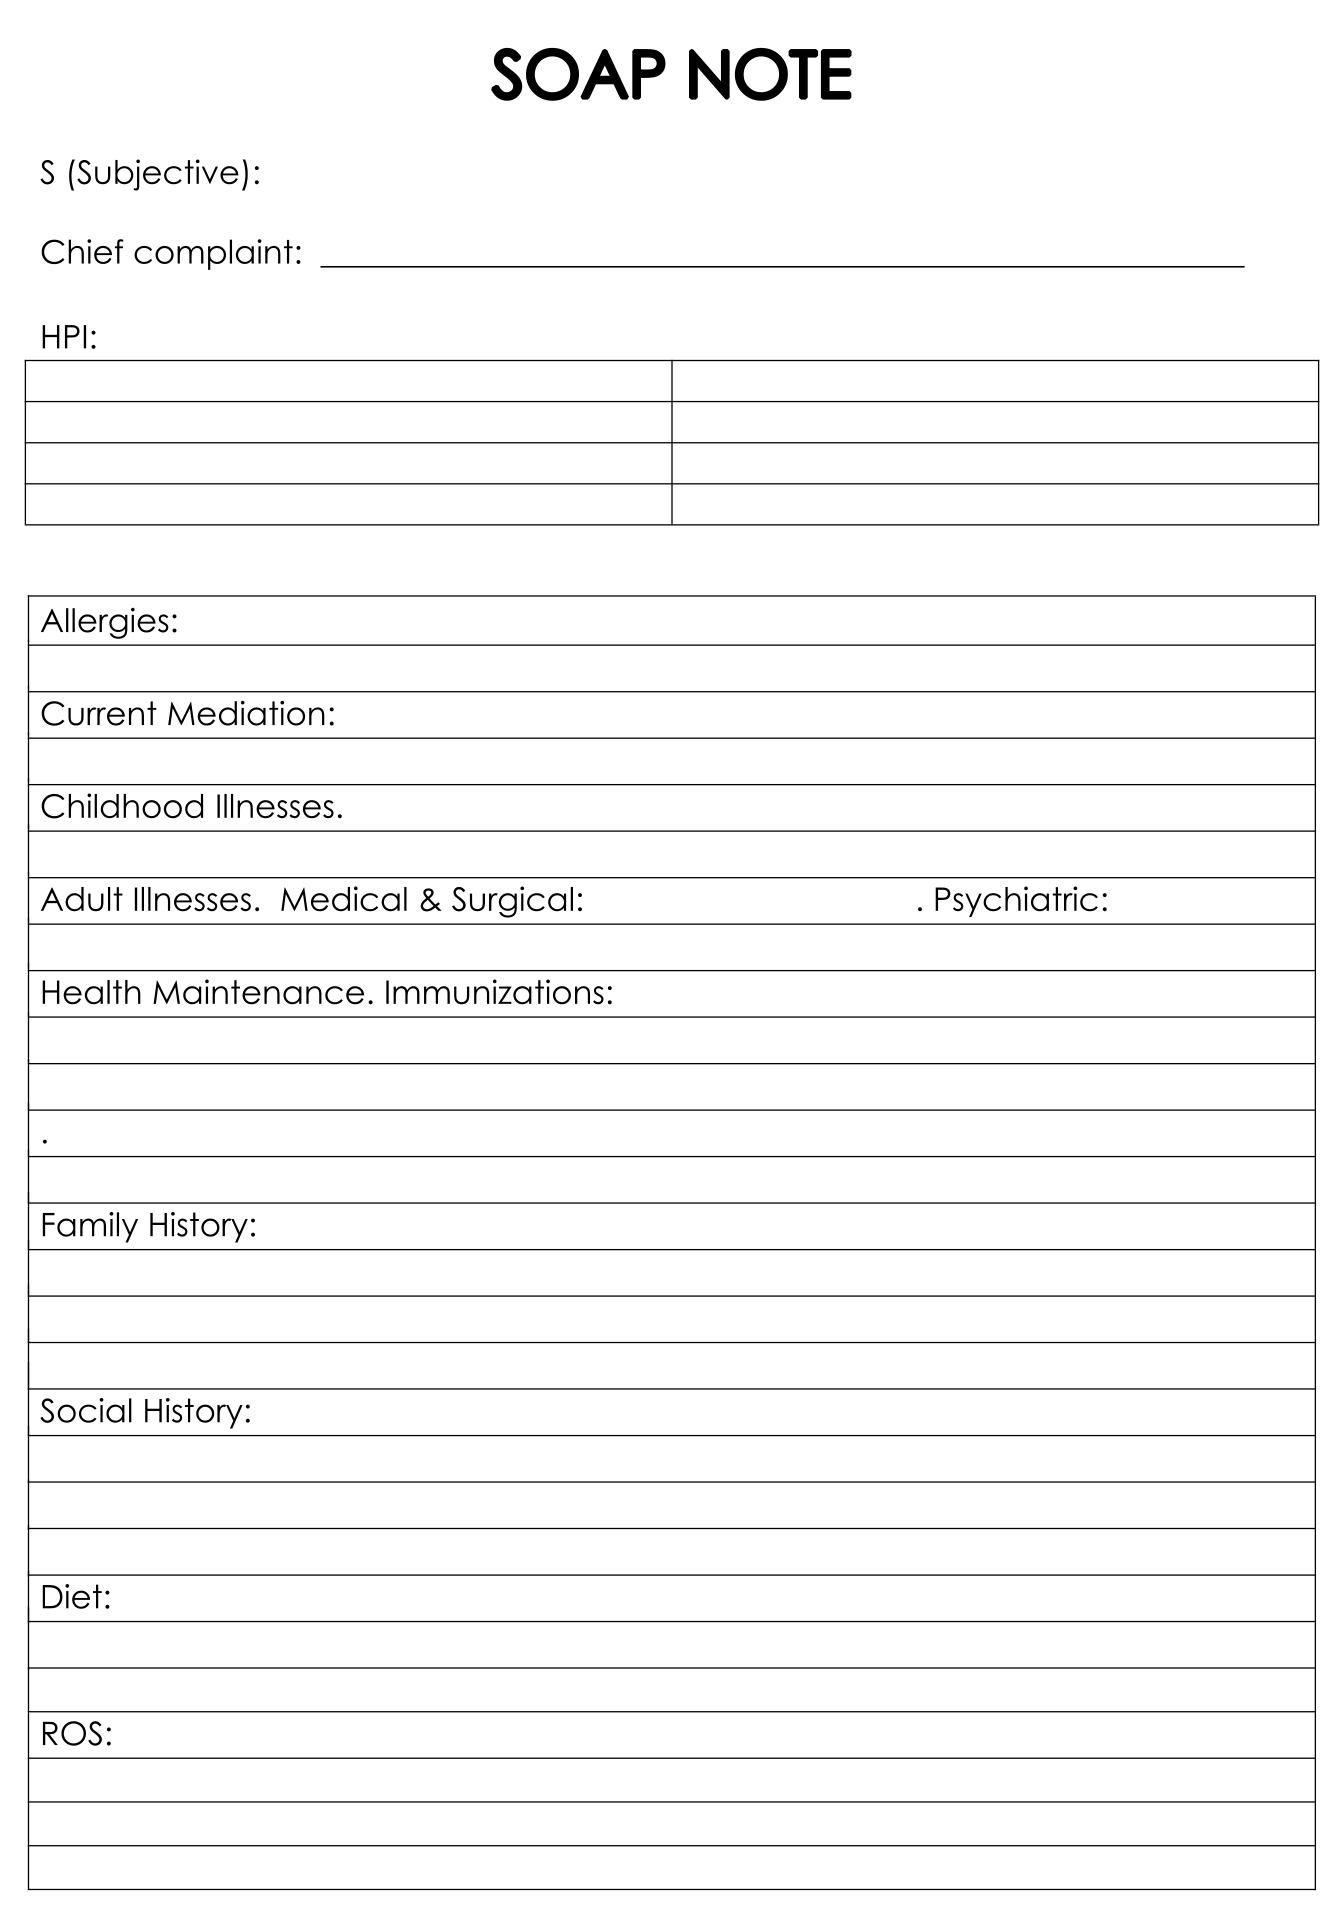 Sample Soap Note Template for Counseling